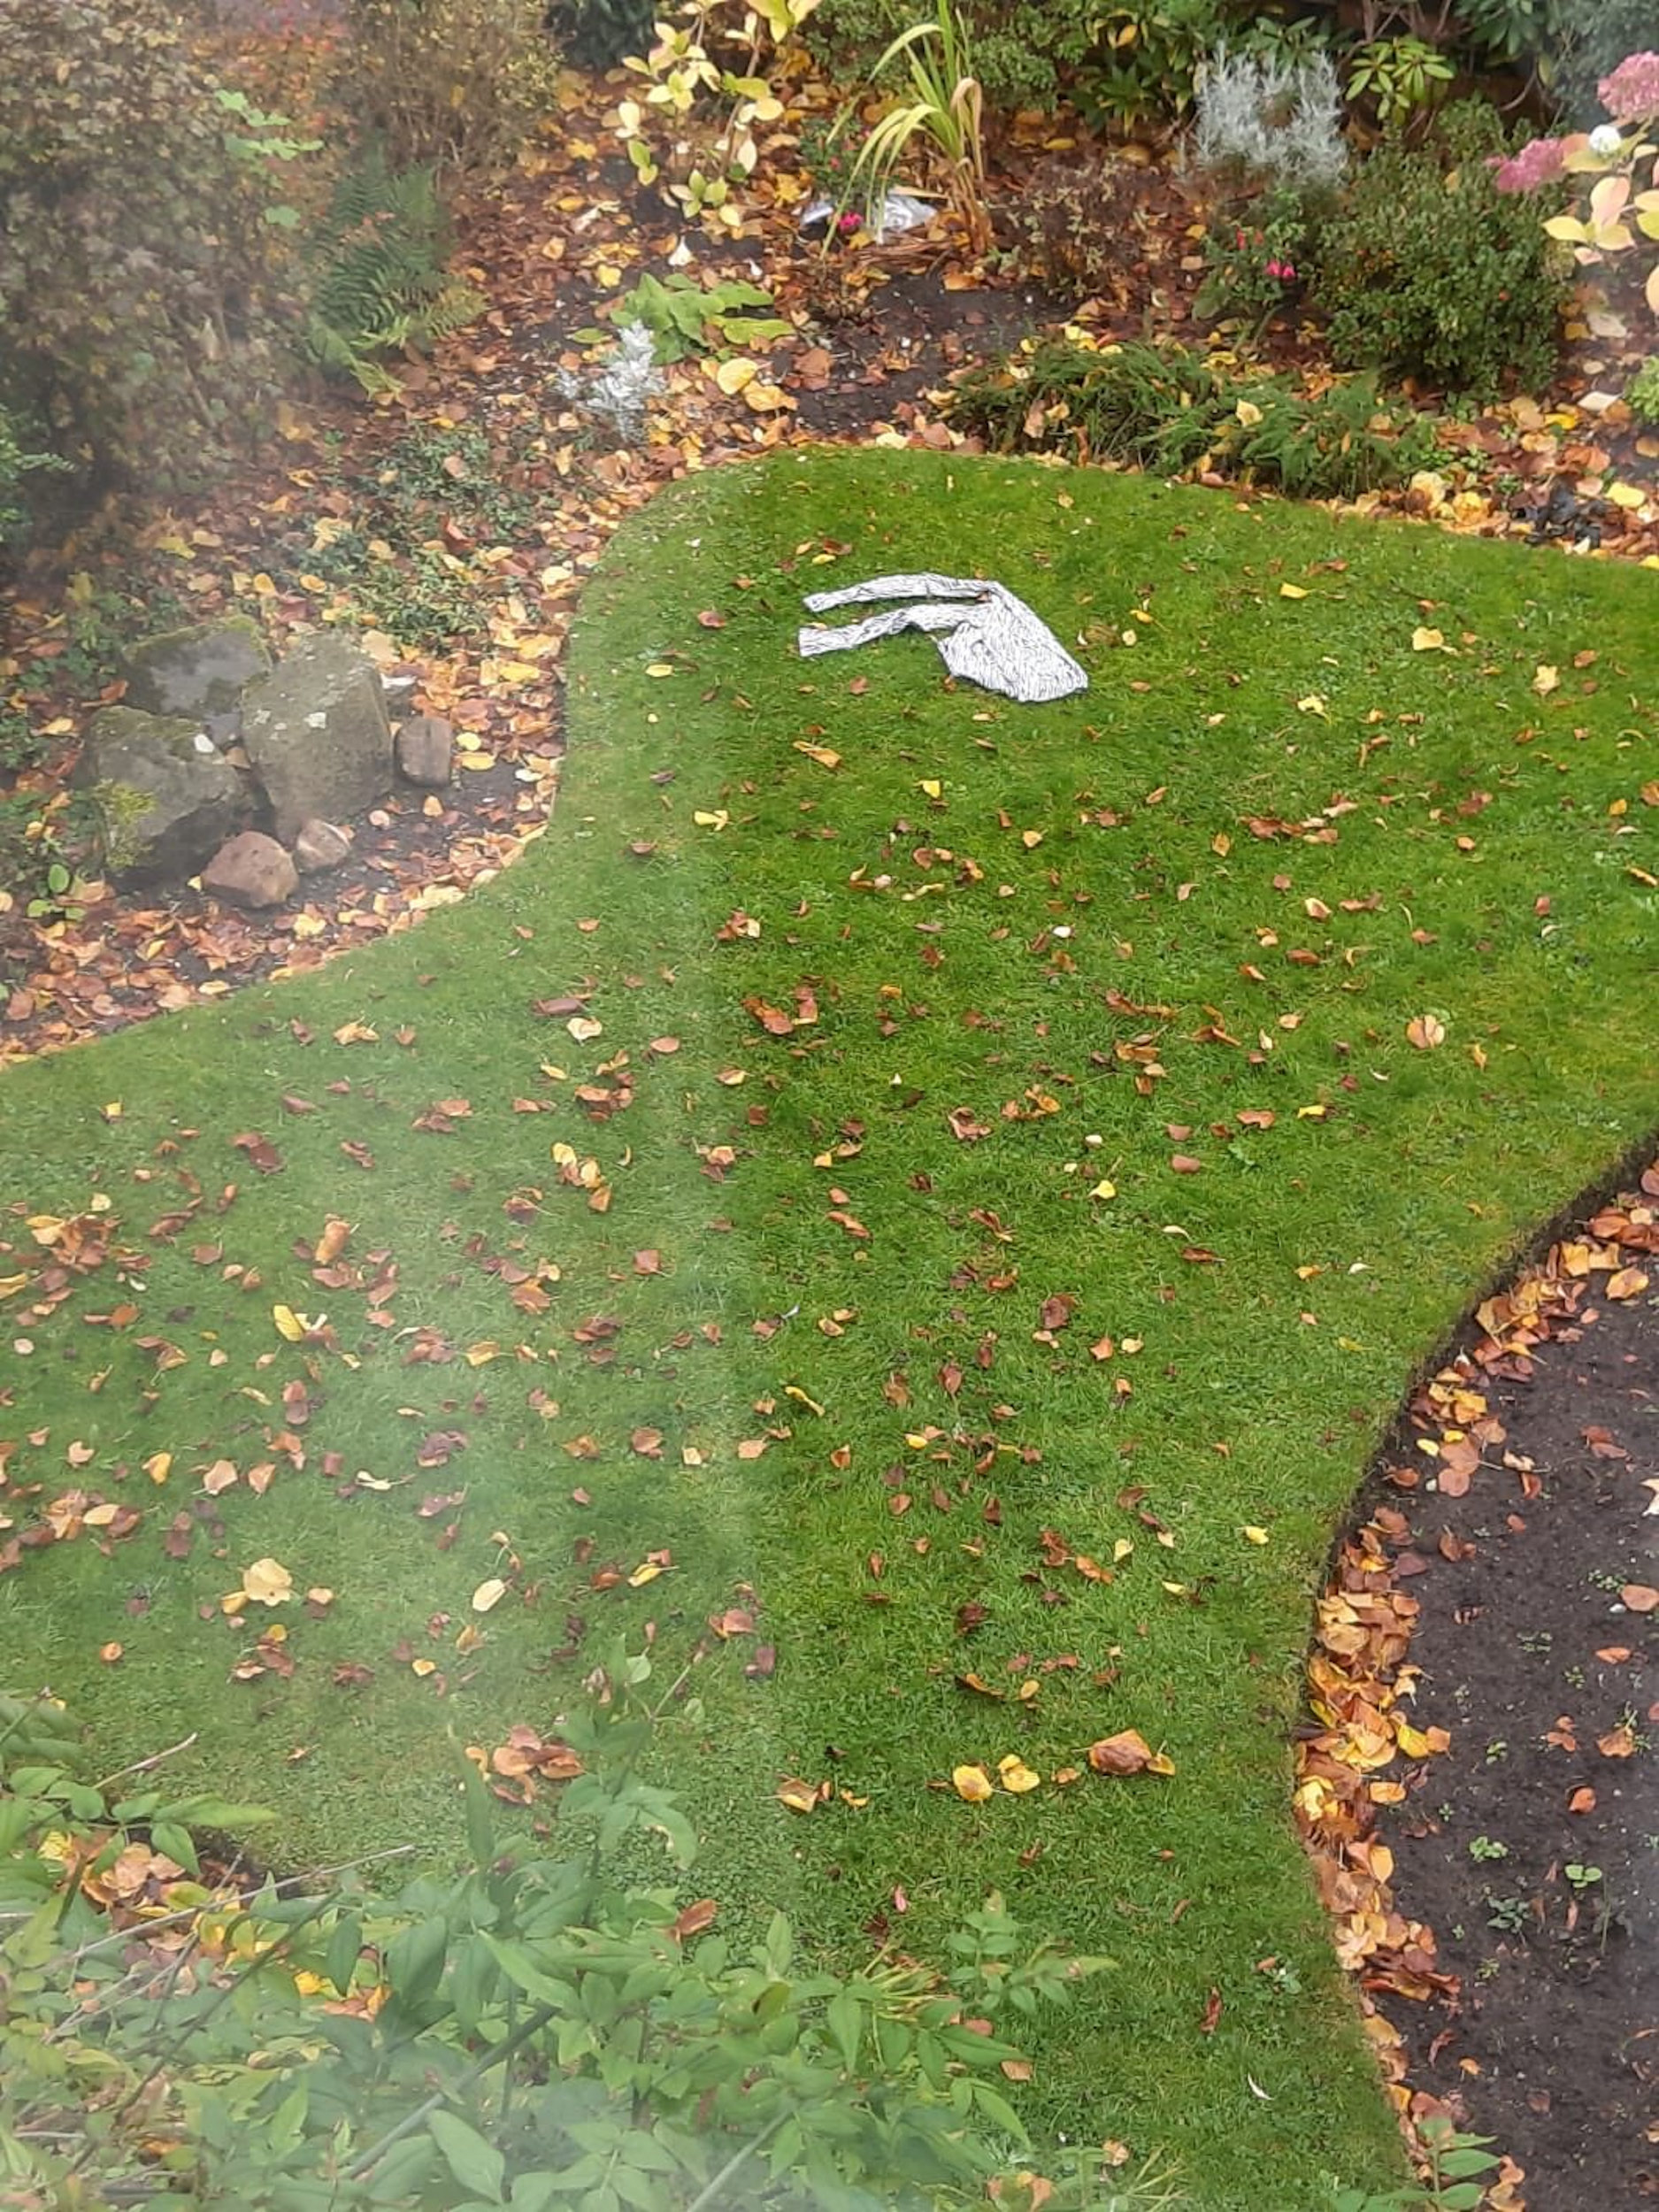 A pair of trousers lying on some grass - Consumer News UK